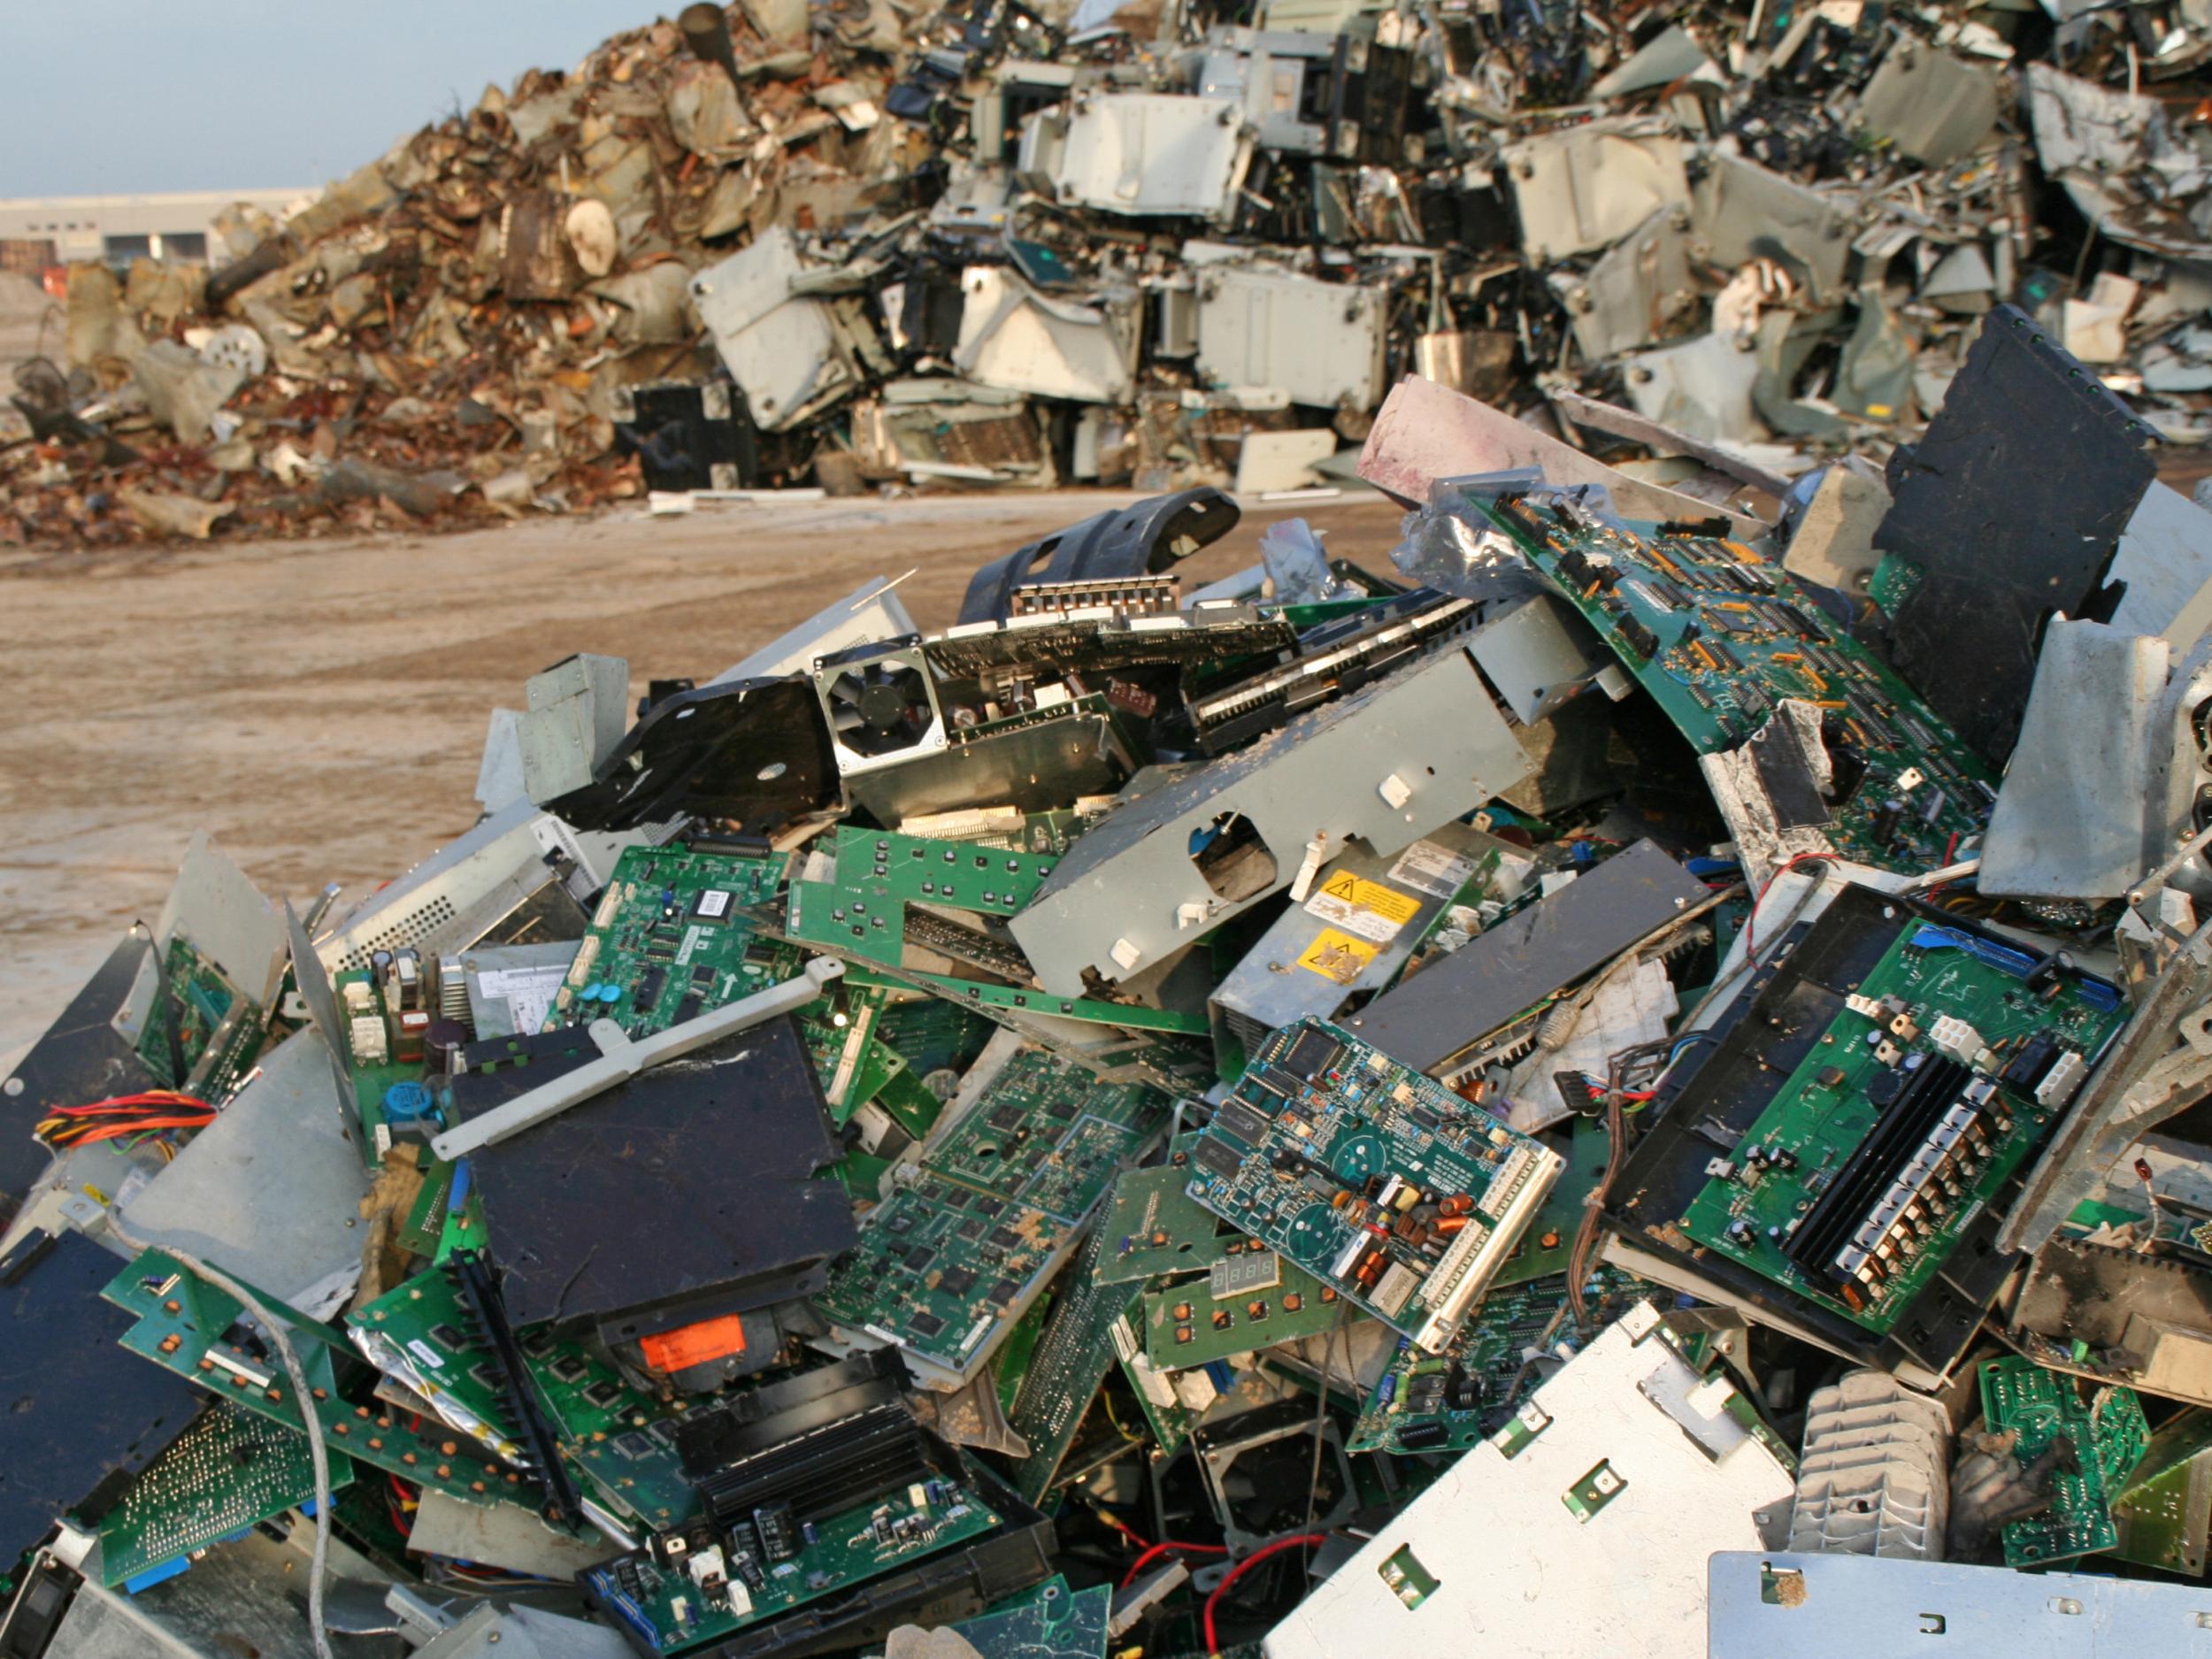 Globally, value of dumped electronic waste is equivalent to GDP of Kenya